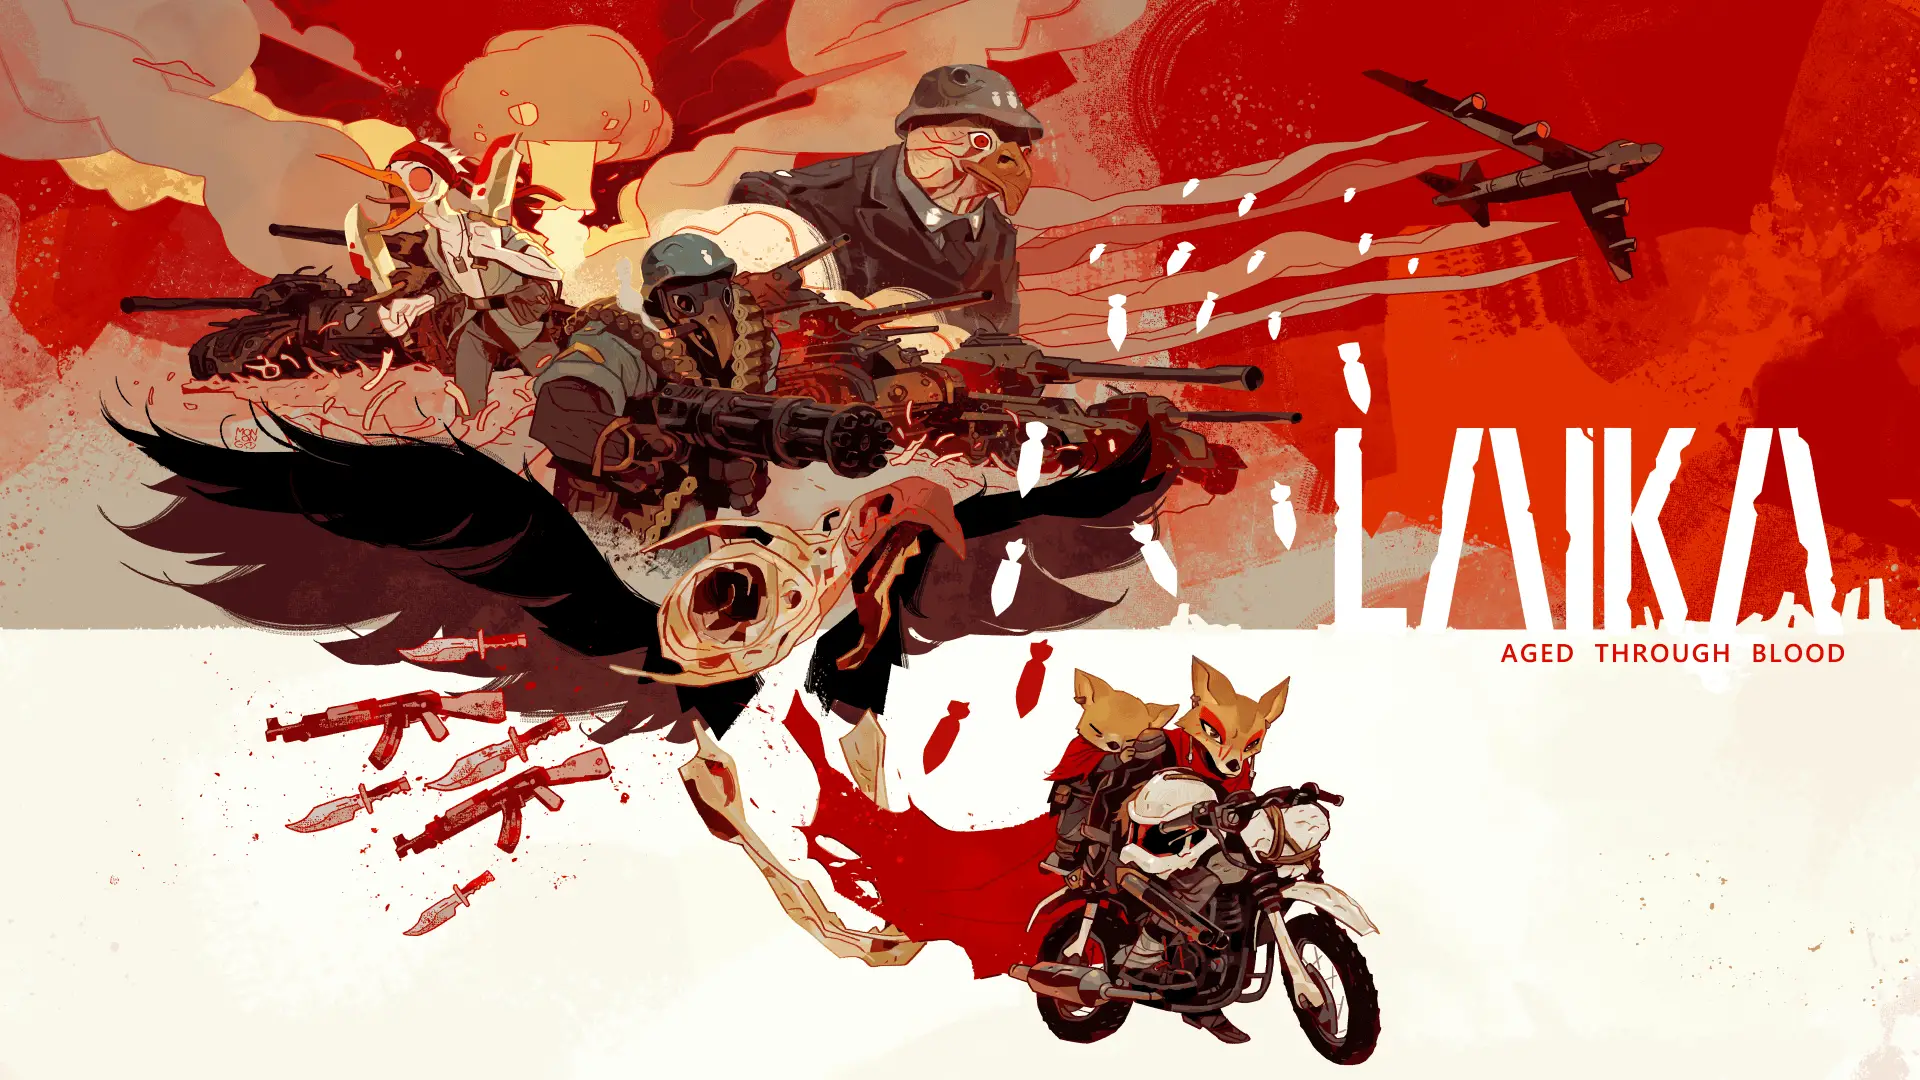 Laika’s Aged Through Blood’s OST now available for streaming